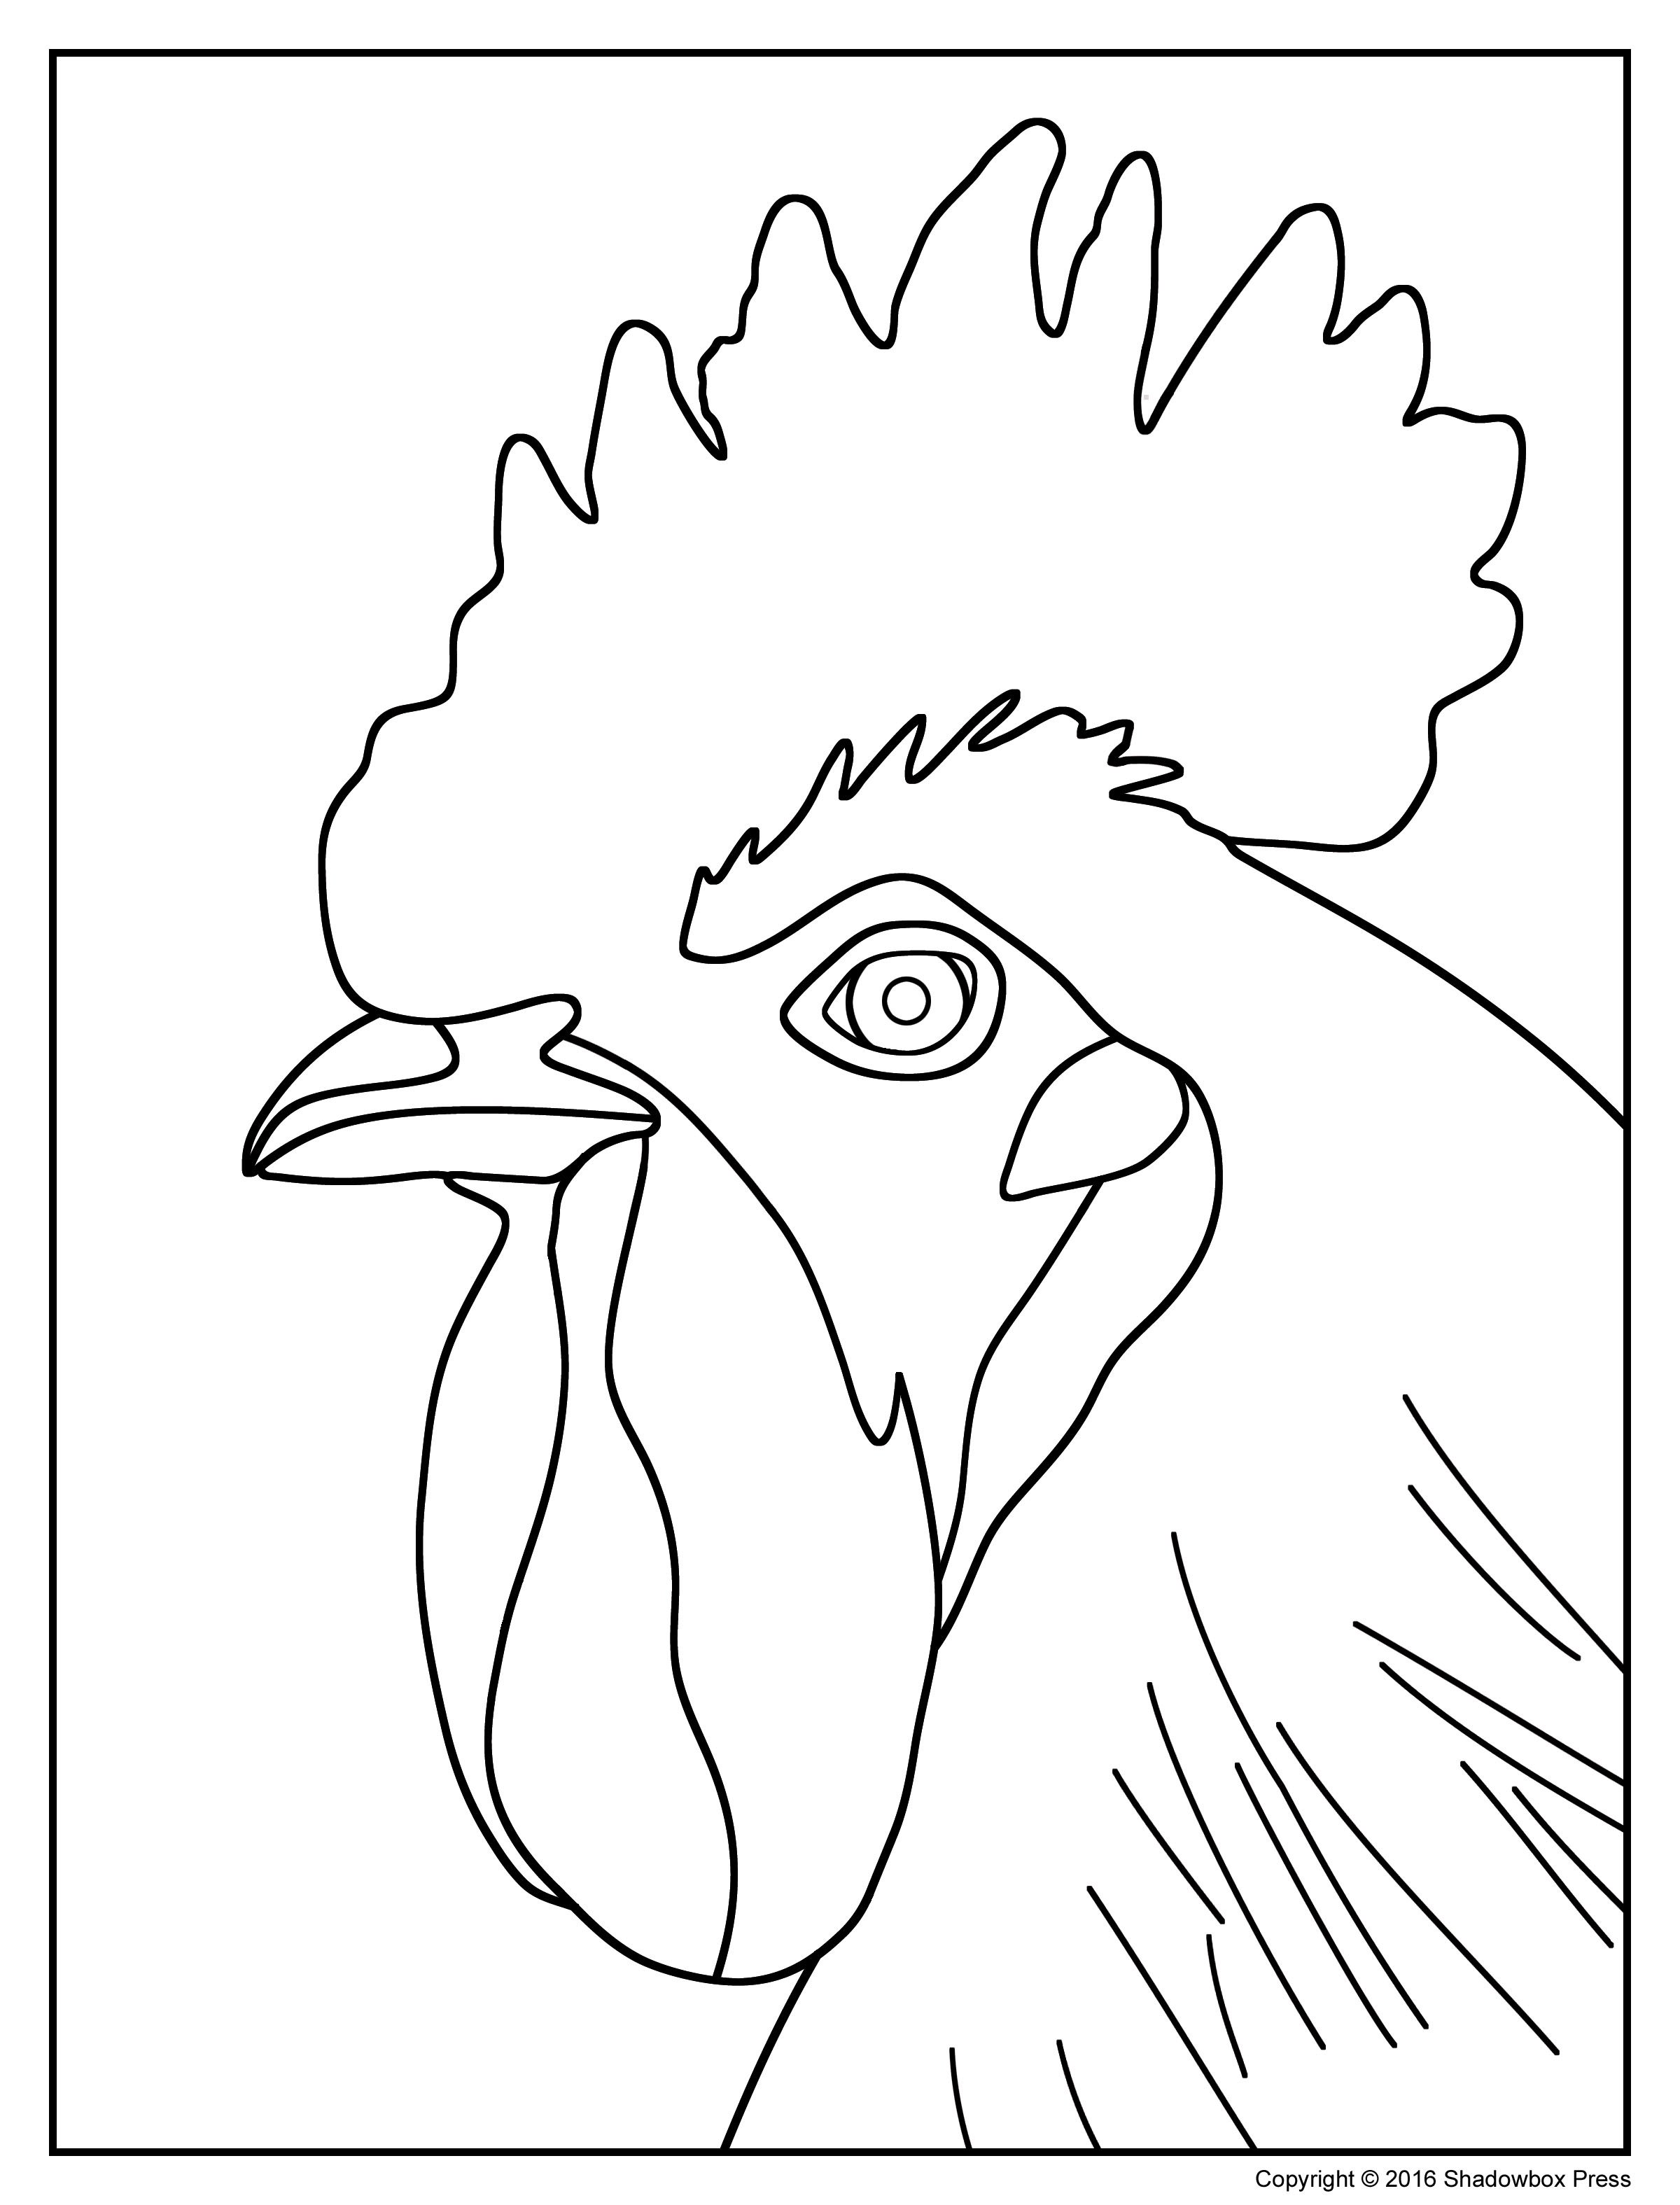 free-coloring-pages-for-alzheimers-patients-coloring-walls